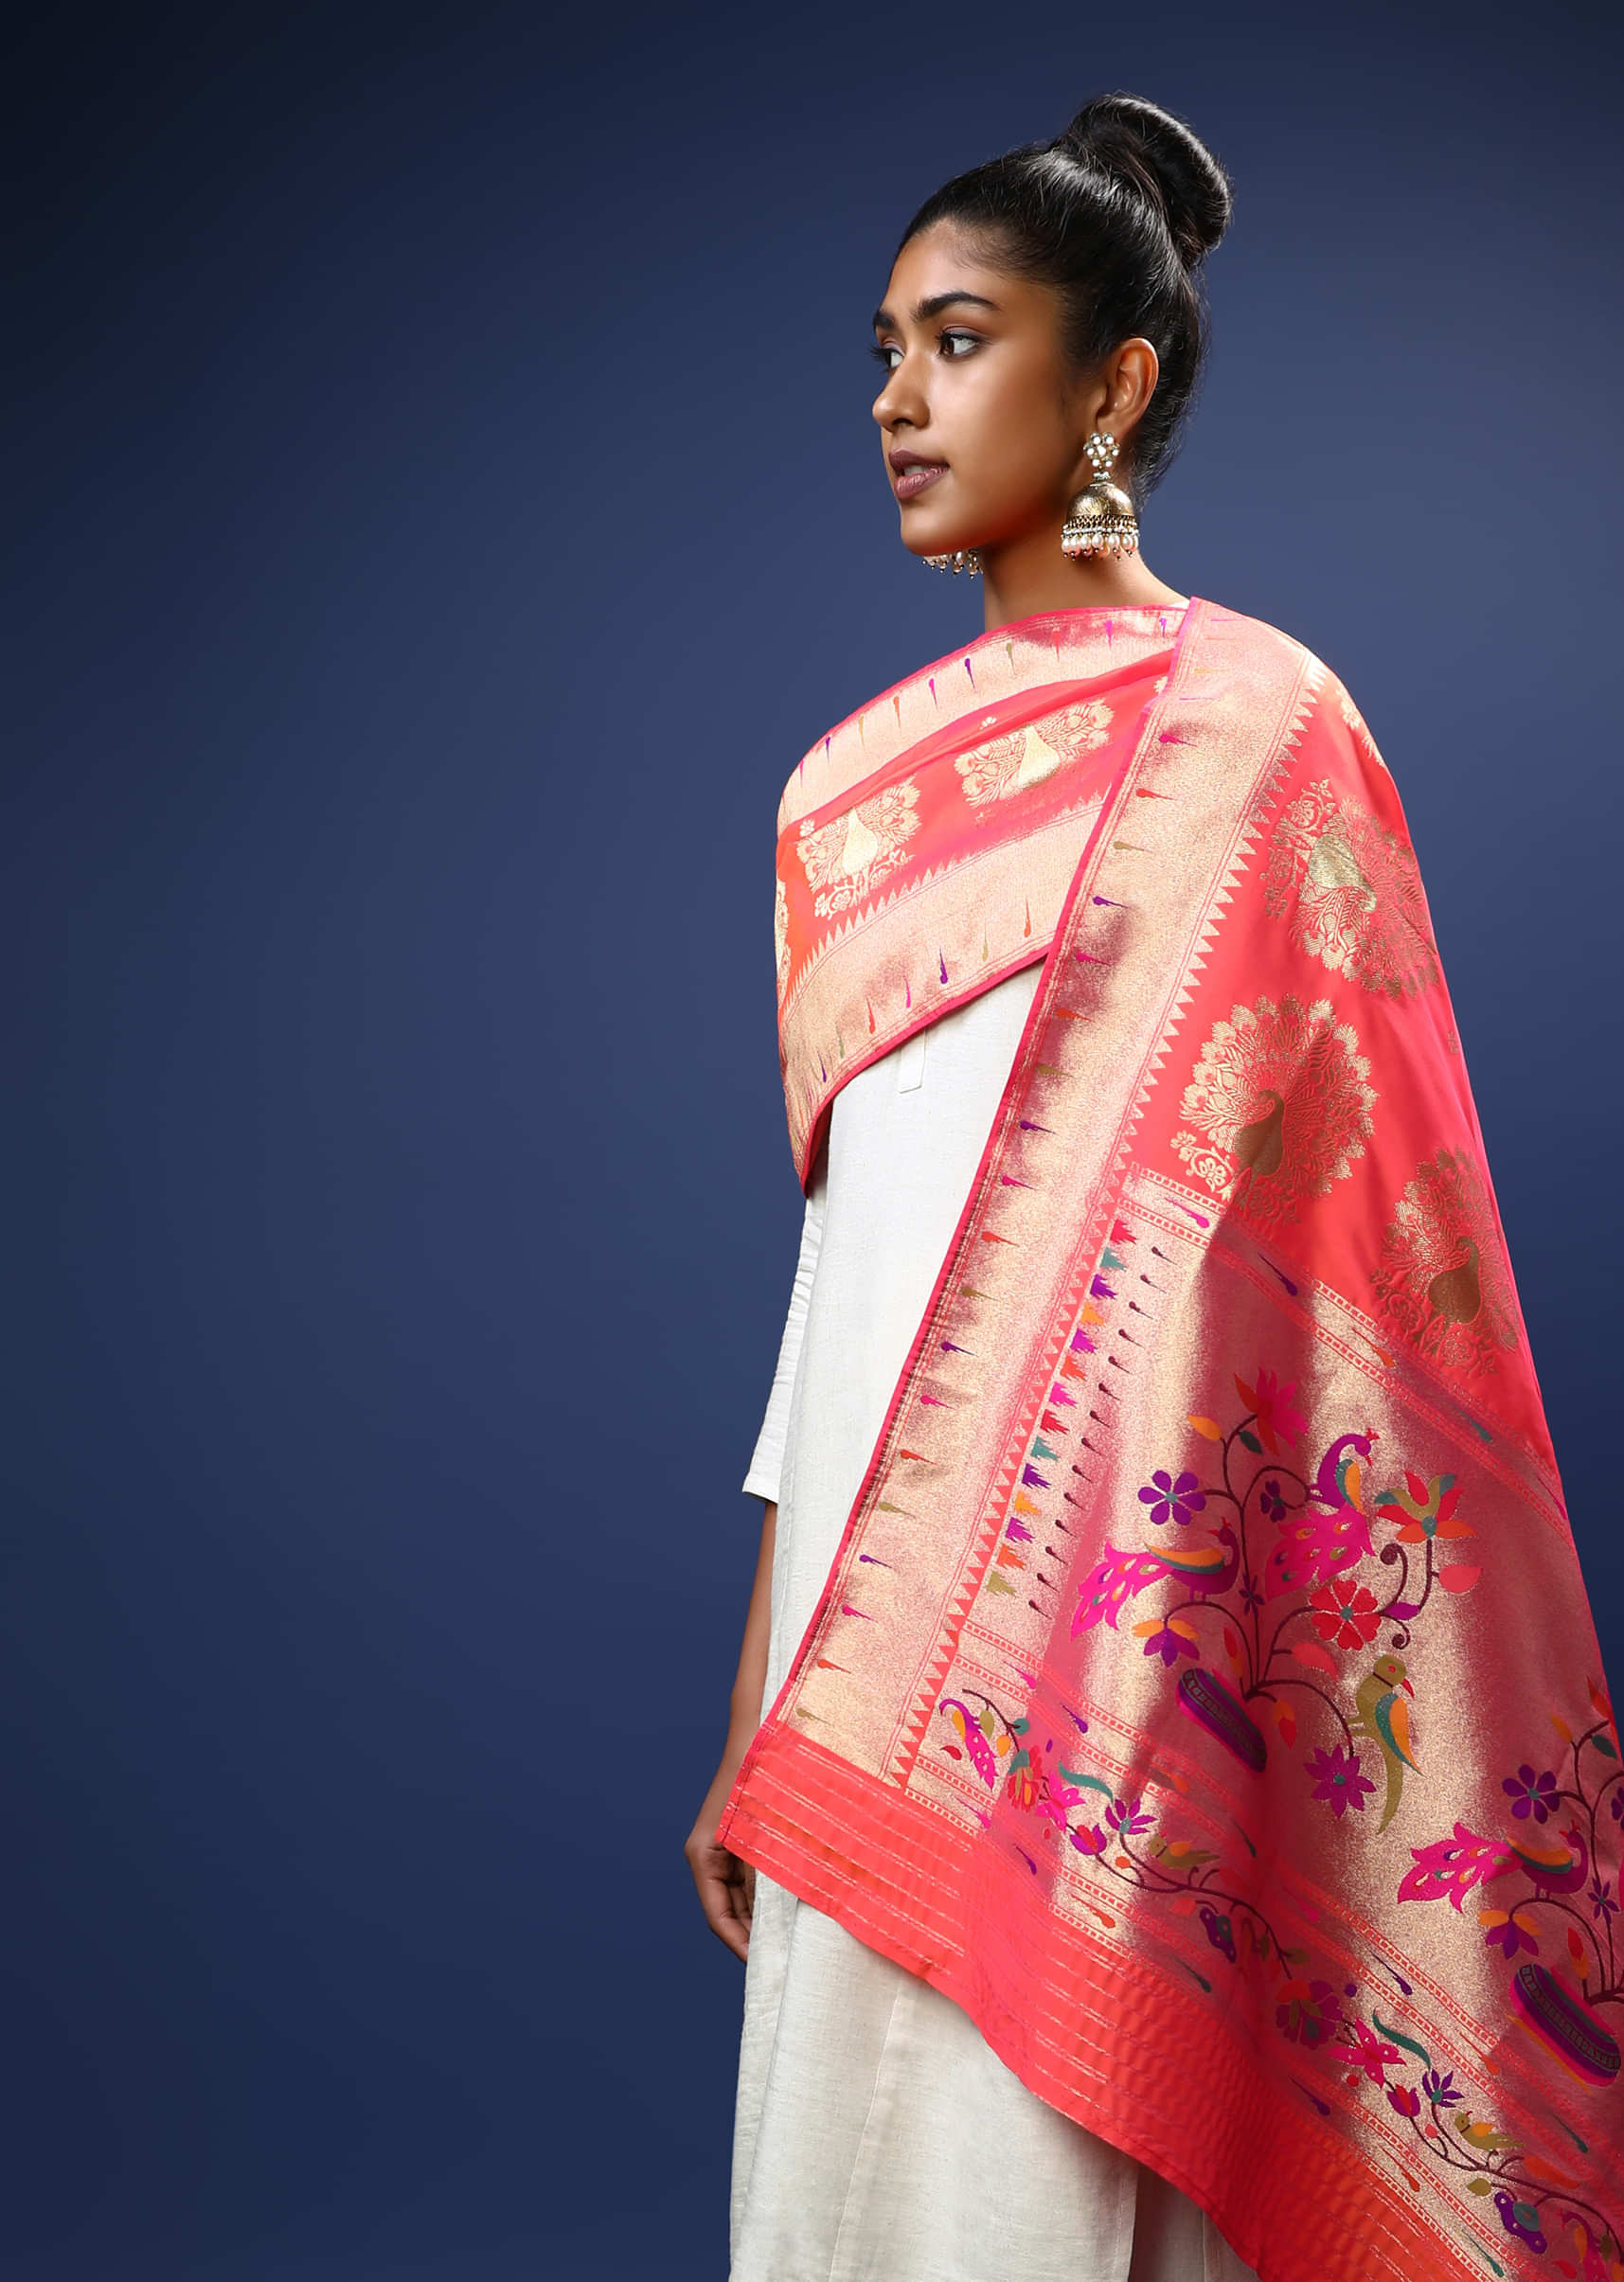 Coral Pink Dupatta In Brocade Silk With Multi Colored Bird Design On The Border And Golden Peacock Motifs Online - Kalki Fashion